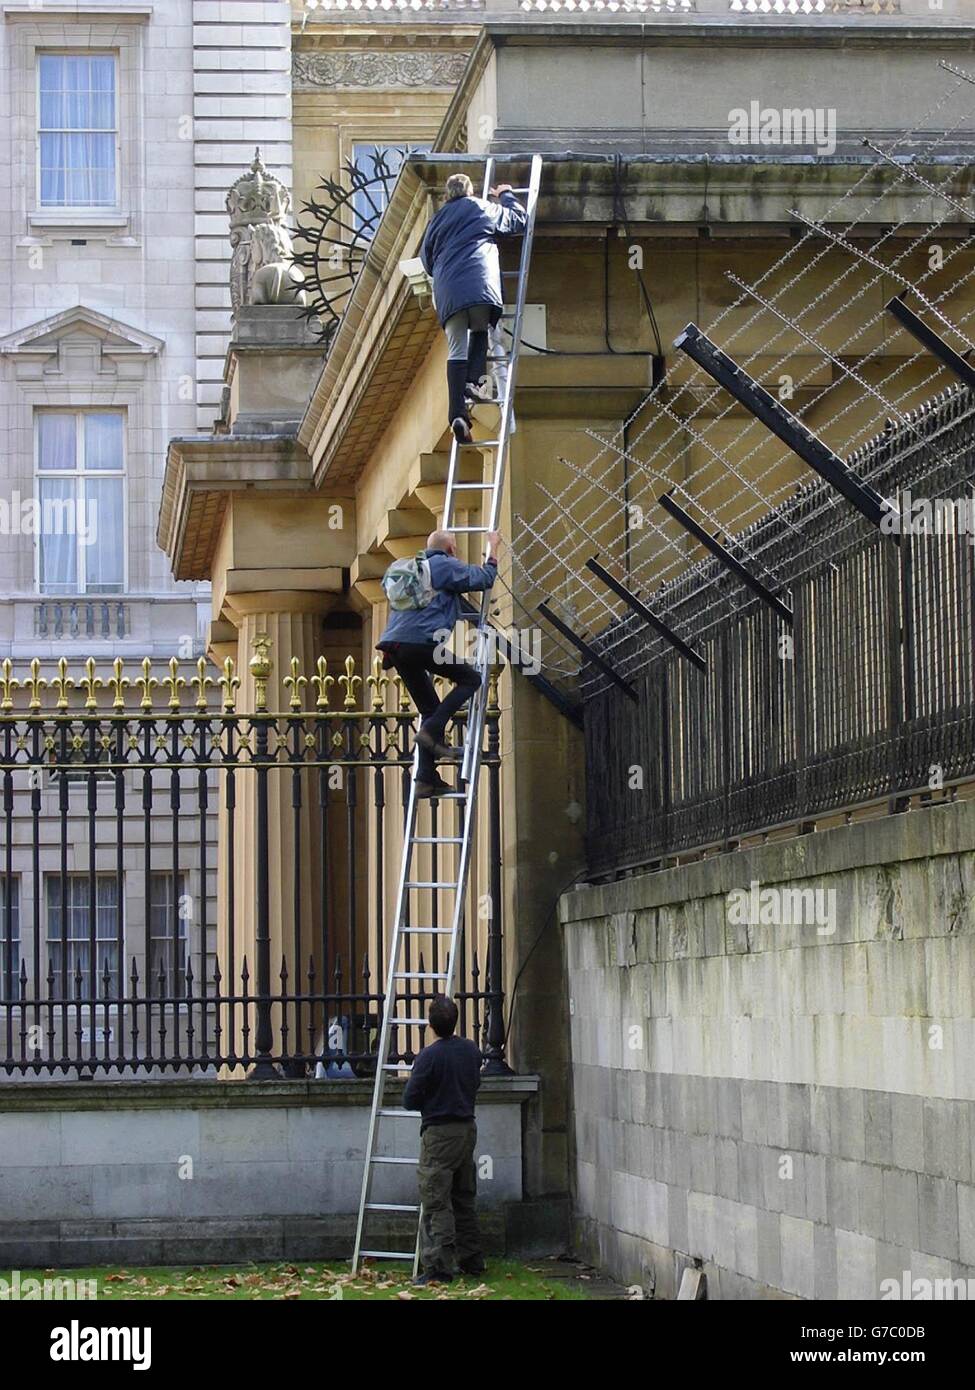 The Fathers 4 Justice demonstrator Jason Hatch (top), 33, from Gloucester, who later dressed as Batman scales the outer fence into the grounds of Buckingham Palace to stage his protest on the ledge of the palace with Dave Pyke who was later wearing a Robin costume (below). Stock Photo